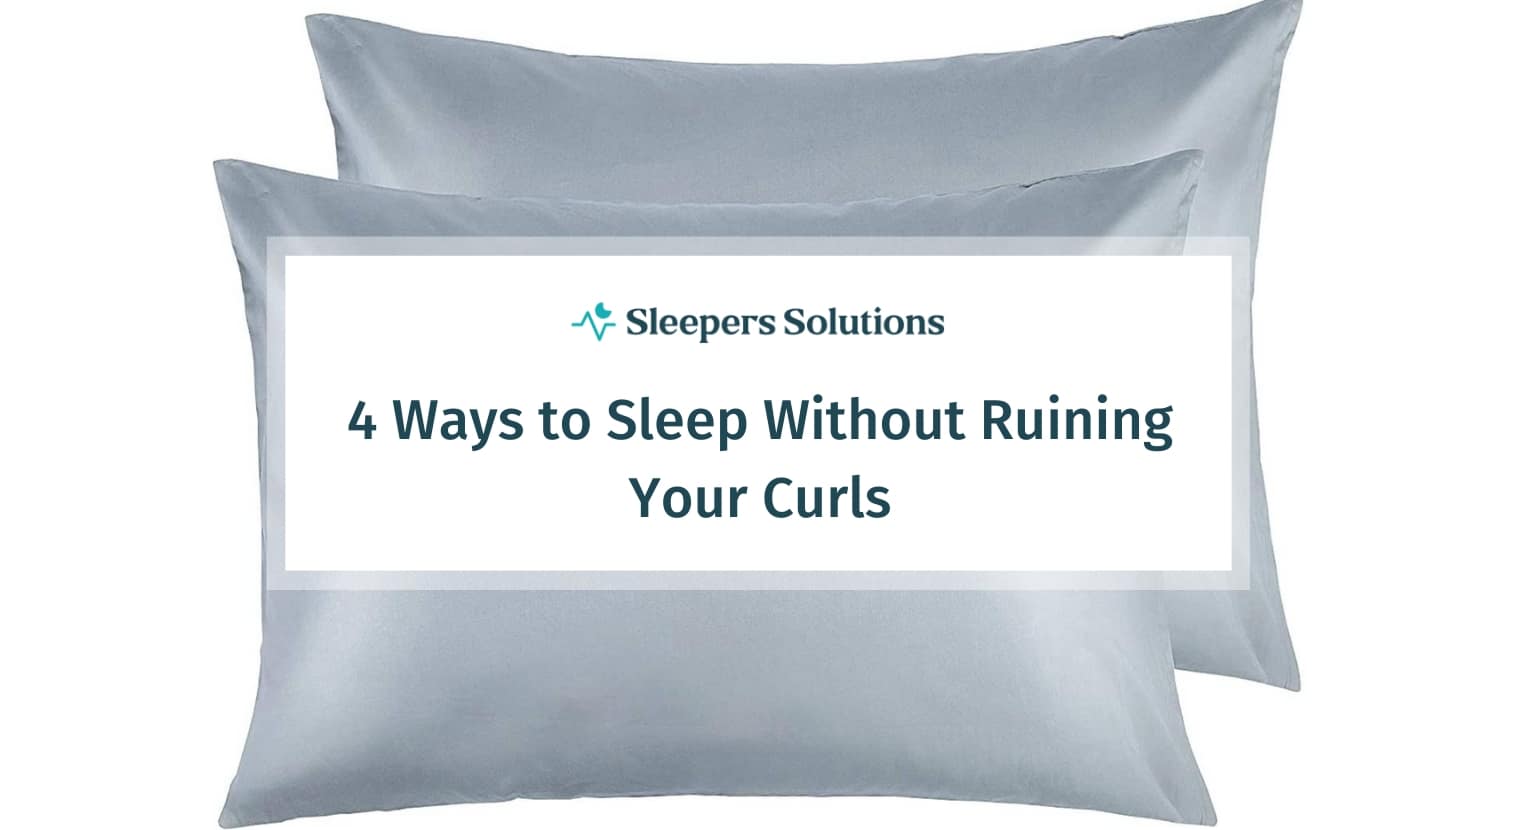 4 Ways to Sleep Without Ruining Your Curls